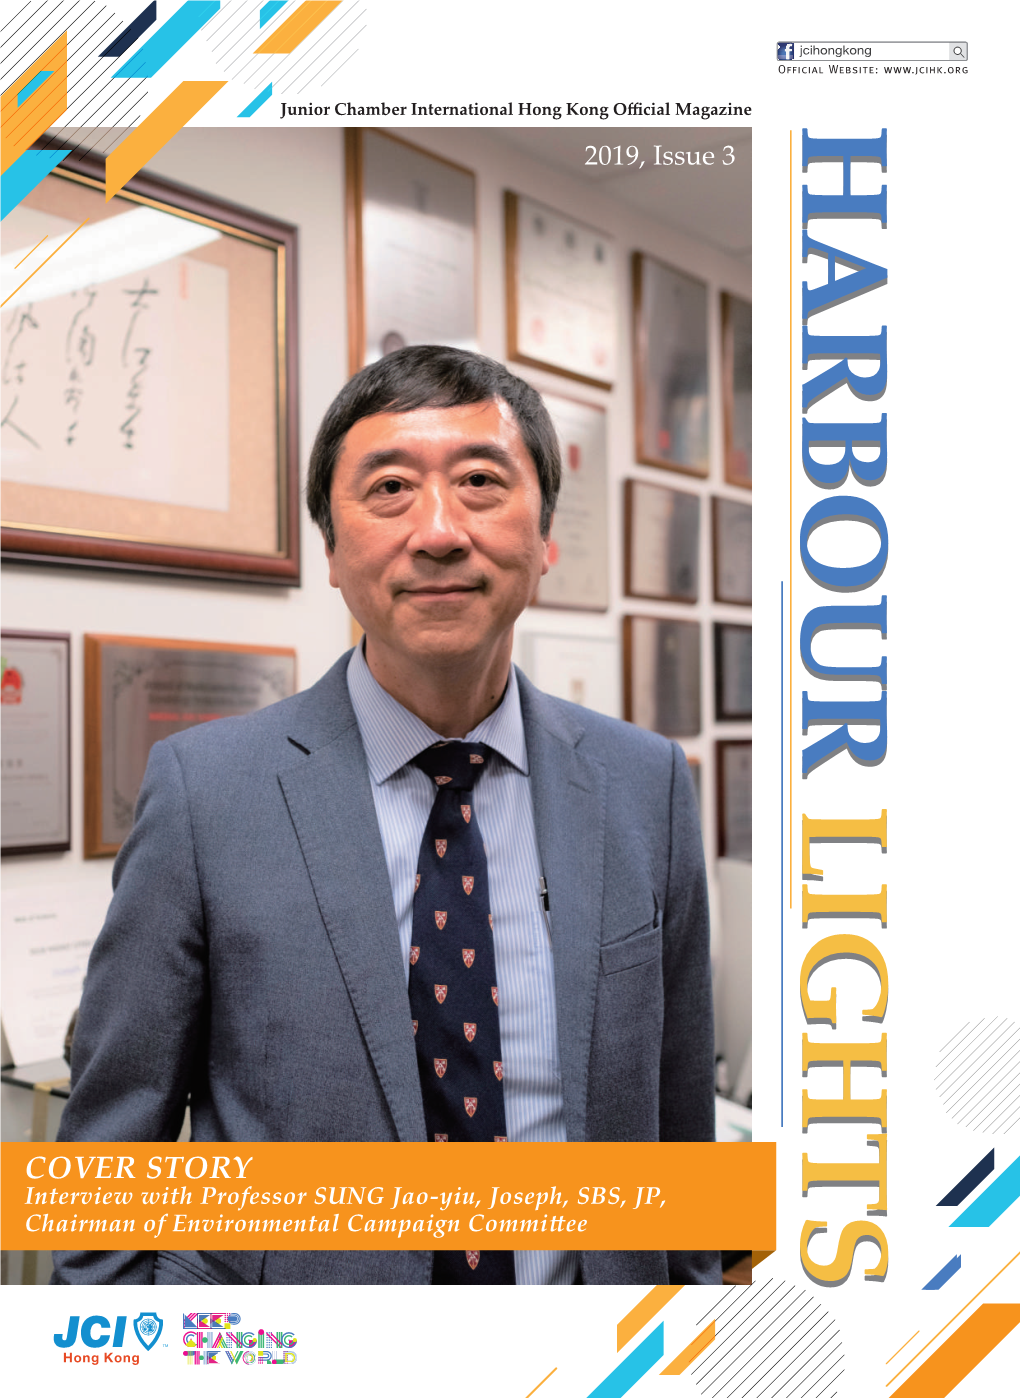 COVER STORY SBS, JP, Interview with Professor SUNG Jao-Yiu, Joseph, Harbour Lights 2019 Issue 3